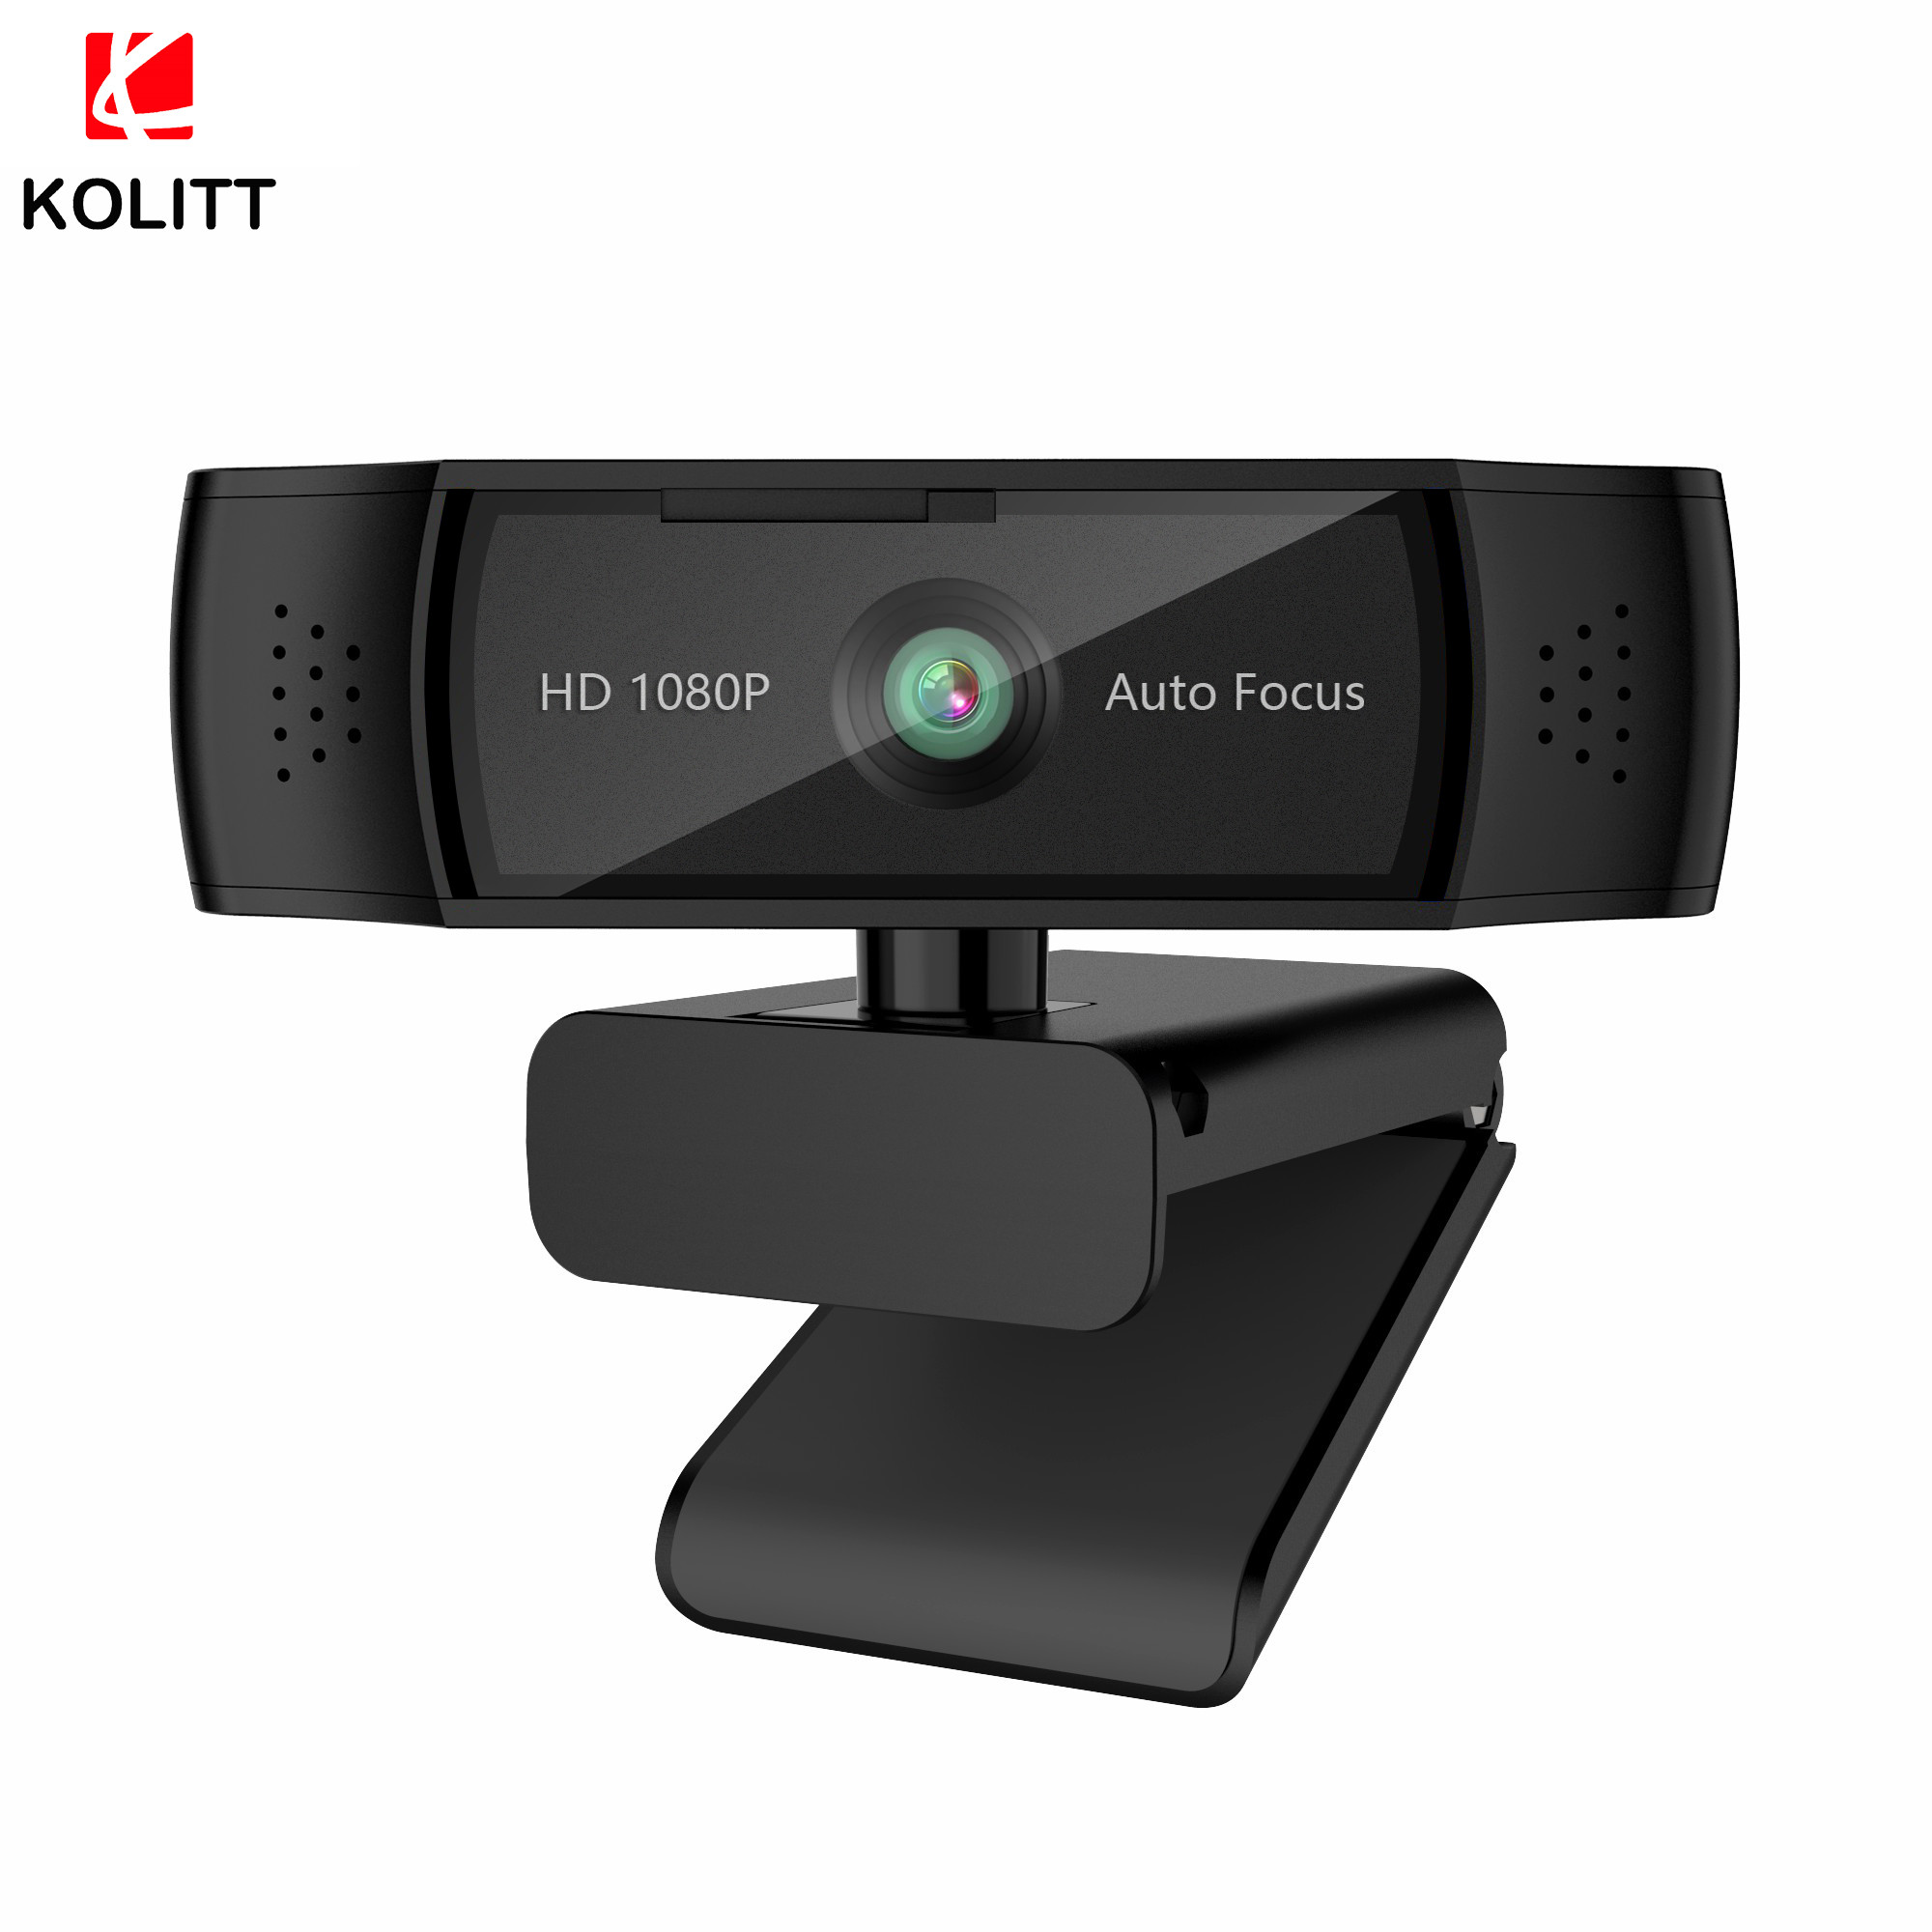 China 1080P 720P HD Auto Focus Webcam / Video Calling Webcam With Dual Microphones factory